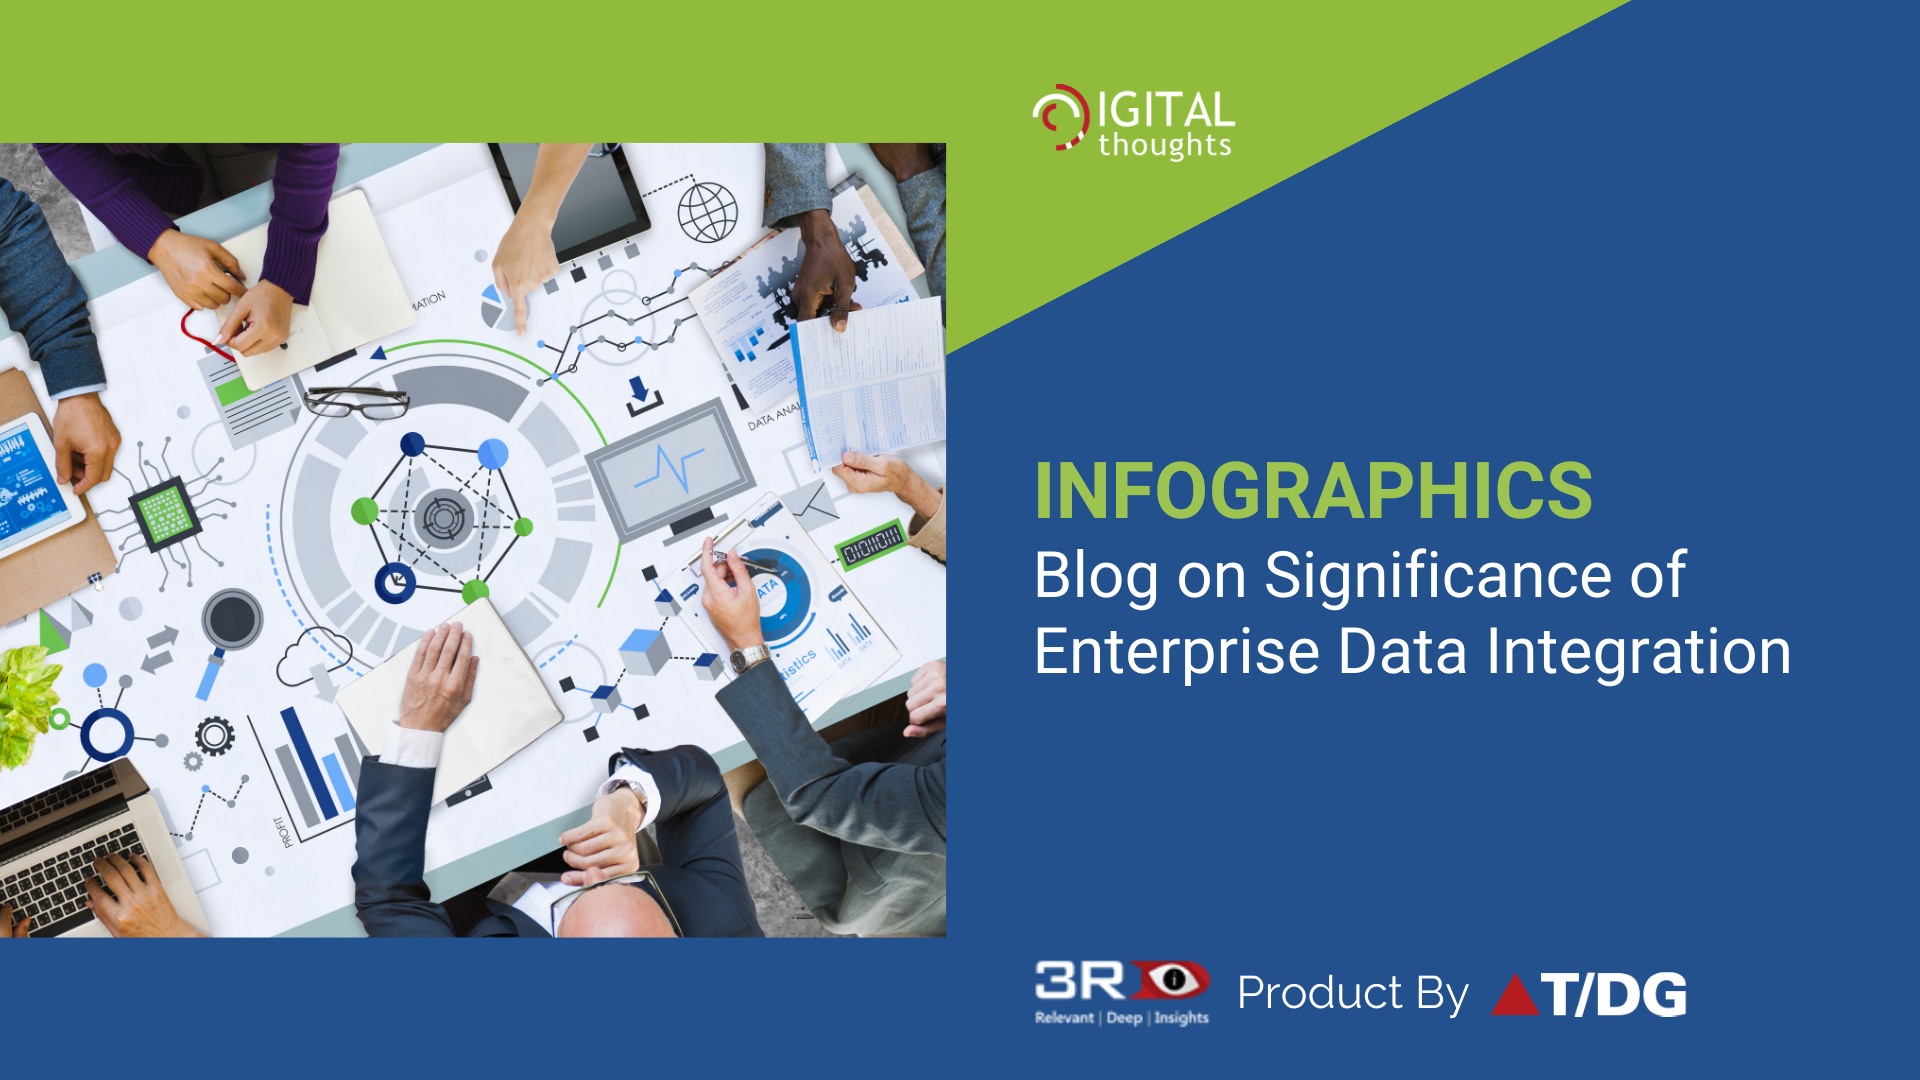 Infographics Blog on Significance of Data Integration to Enterprise Search Today